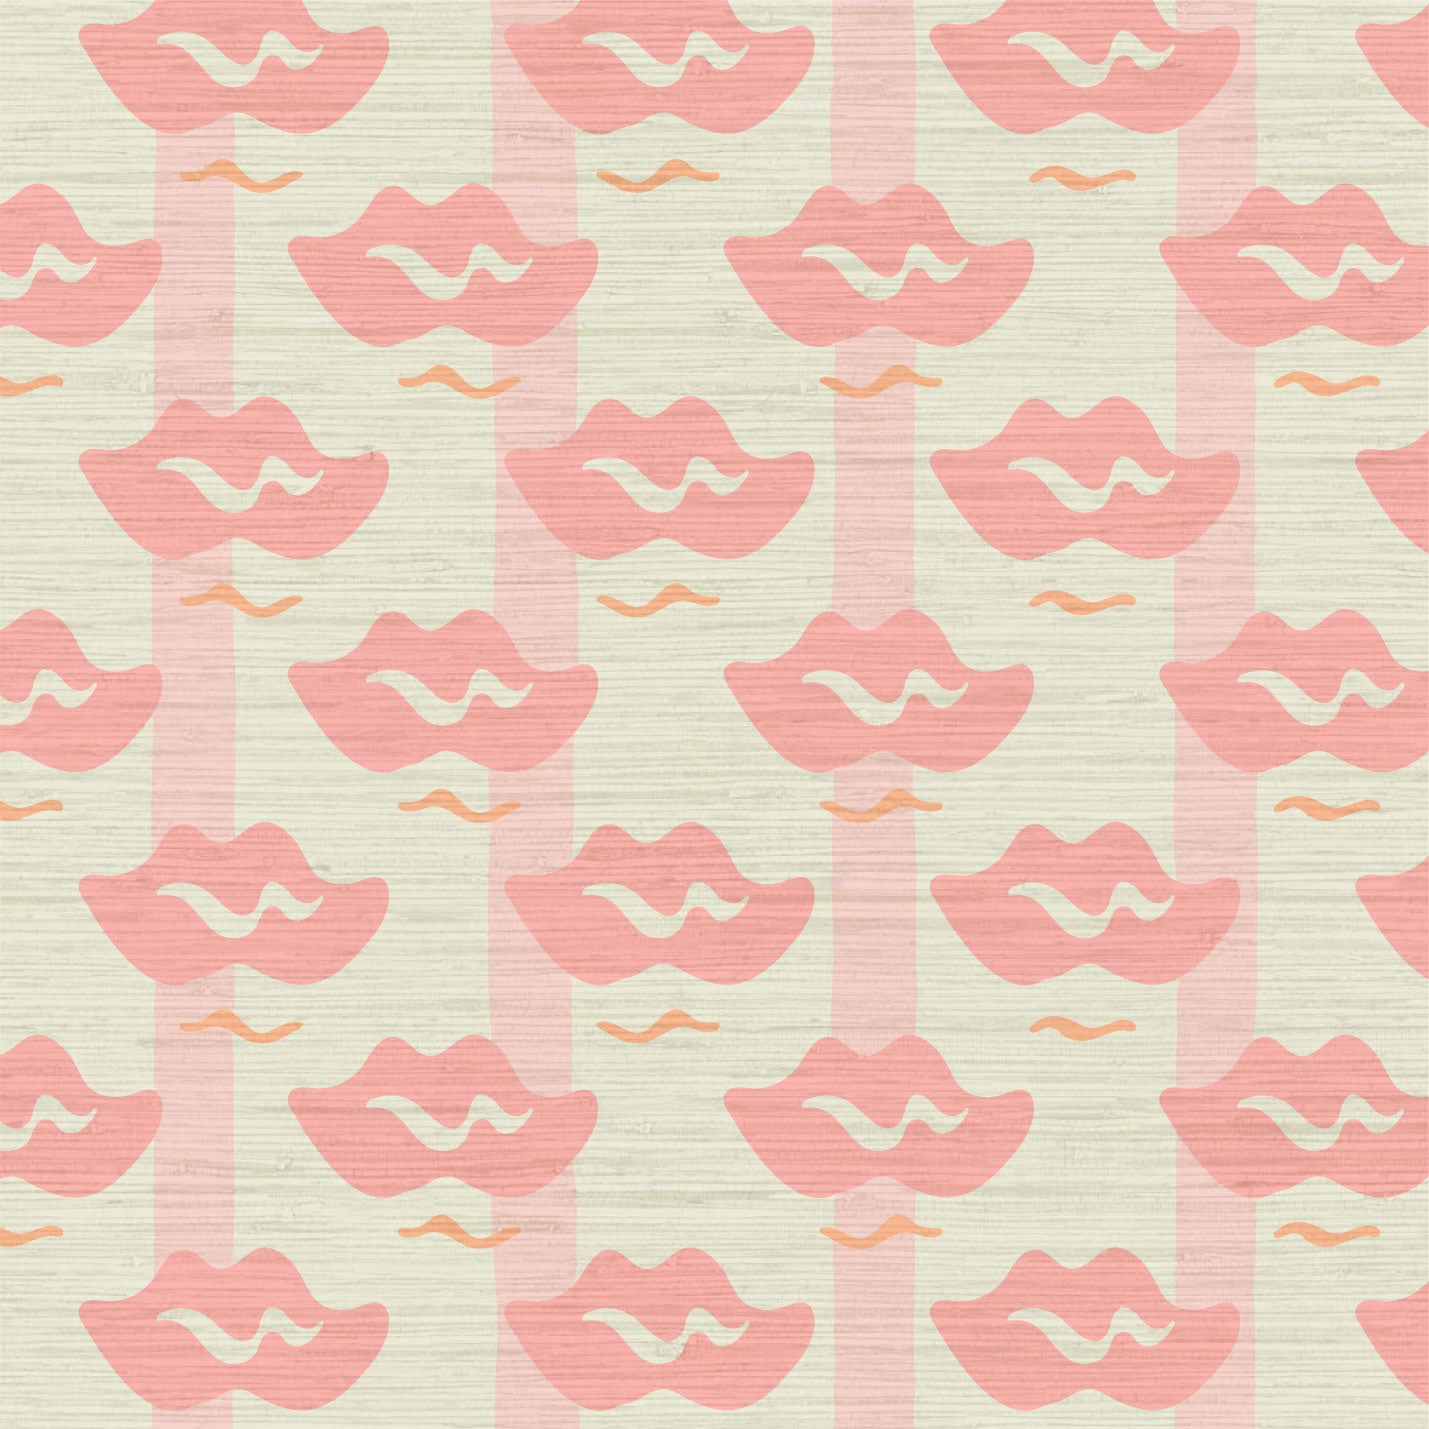 Grasscloth wallpaper Natural Textured Eco-Friendly Non-toxic High-quality Sustainable Interior Design Bold Custom Tailor-made Retro chic Bold Salon Beauty lips Botox jungle bold stripe lips jungle tropical makeup pink cream baby